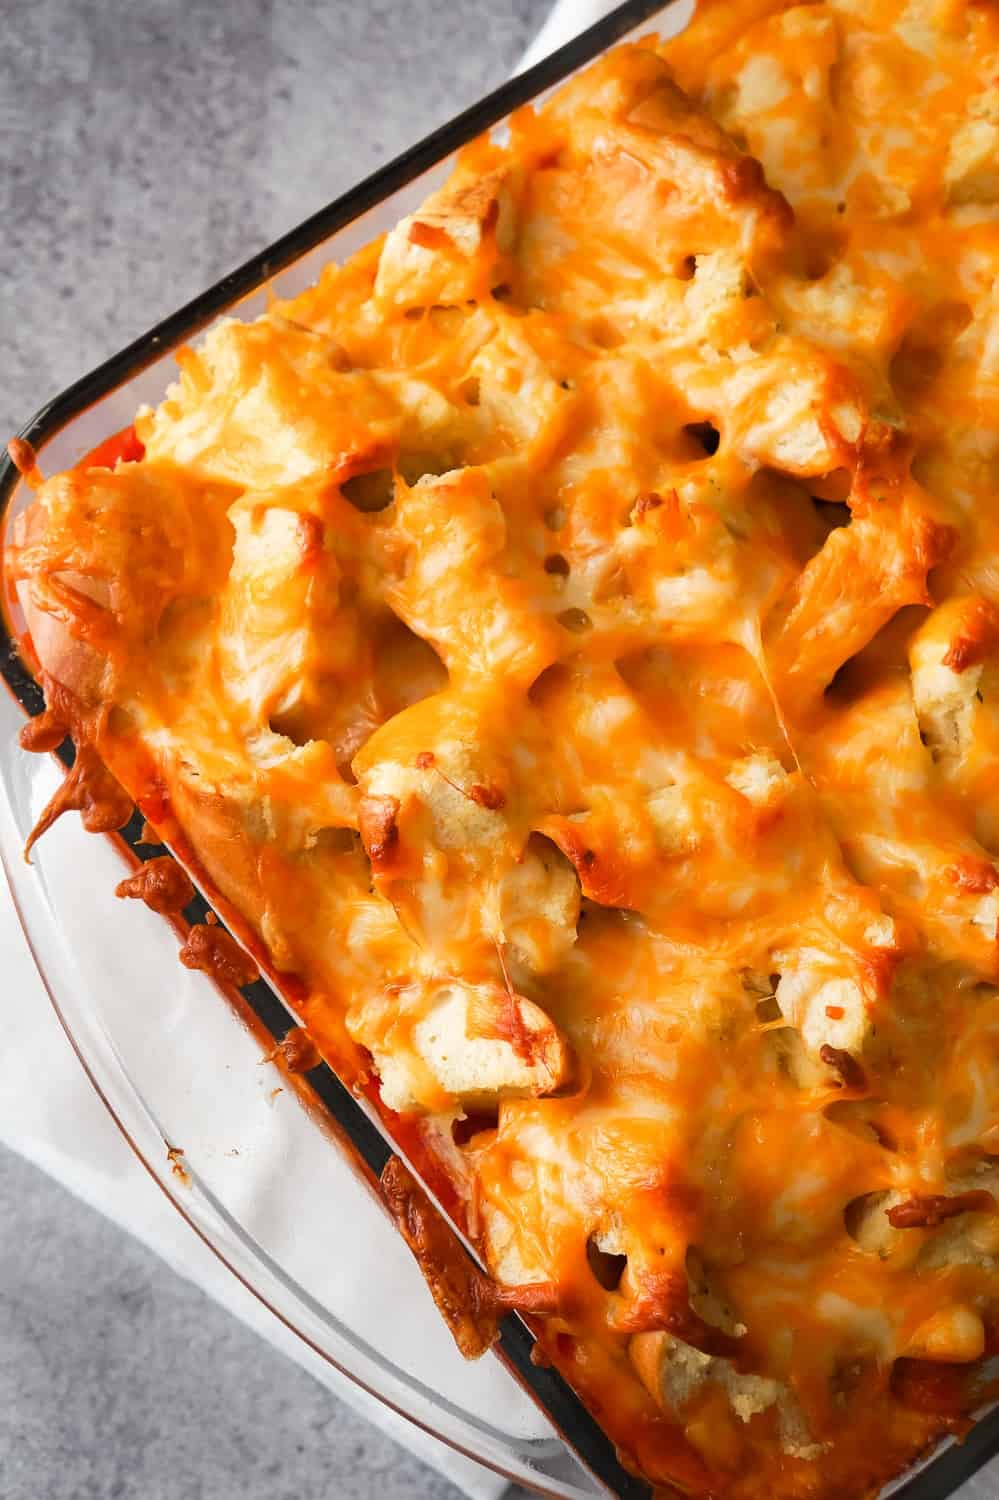 Easy Ground Chicken Casserole is a simple but delicious dinner recipe. The ground chicken base is topped with marinara sauce and cheesy garlic bread topping. This easy casserole is the best ground chicken recipe.